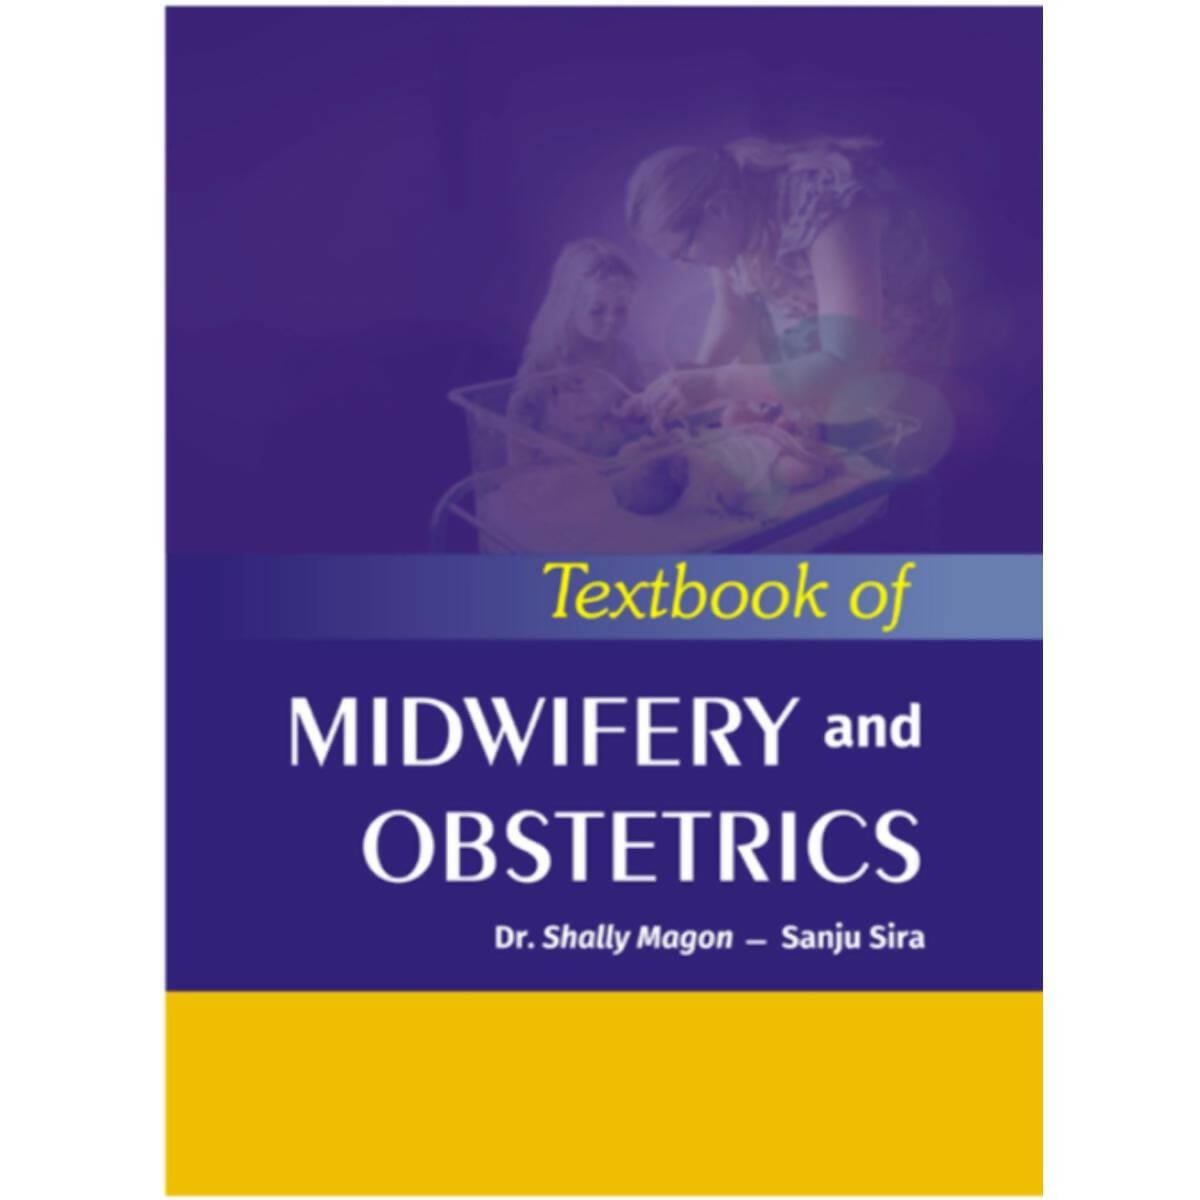 Textbook of Midwifery and Obstetrics - ValueBox